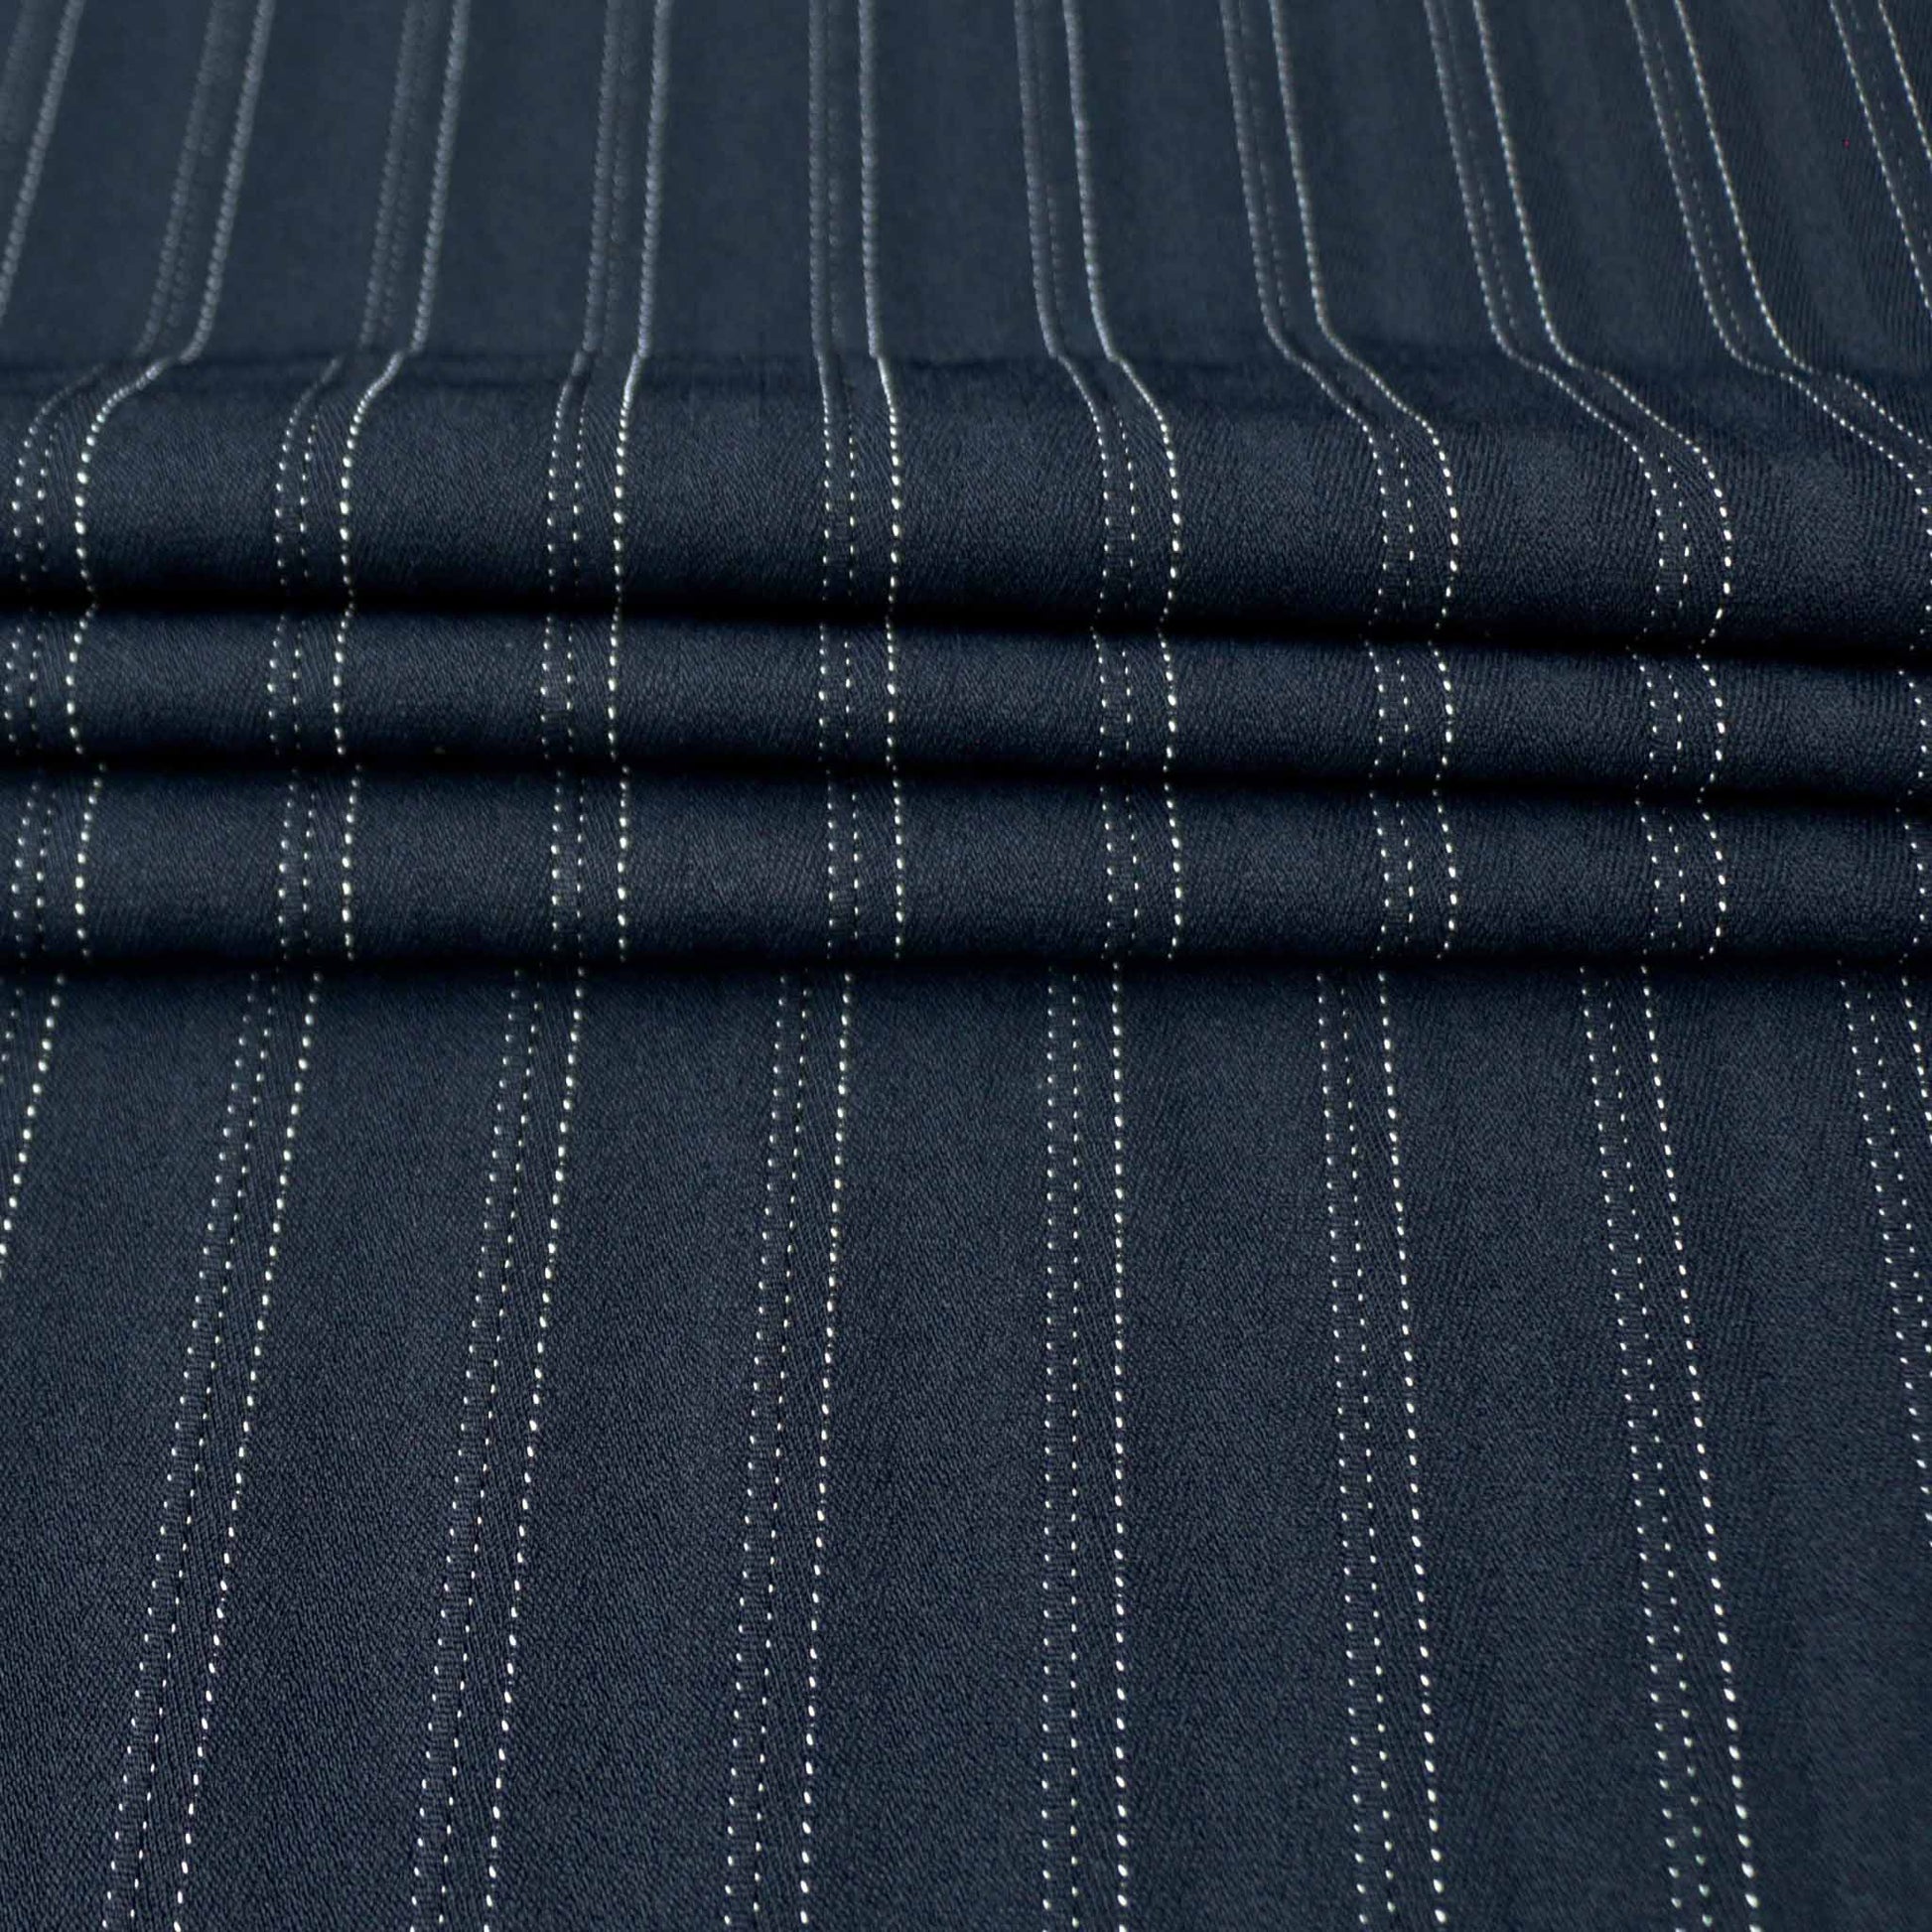 stretch navy suiting fabric with white dotted pinstripe design